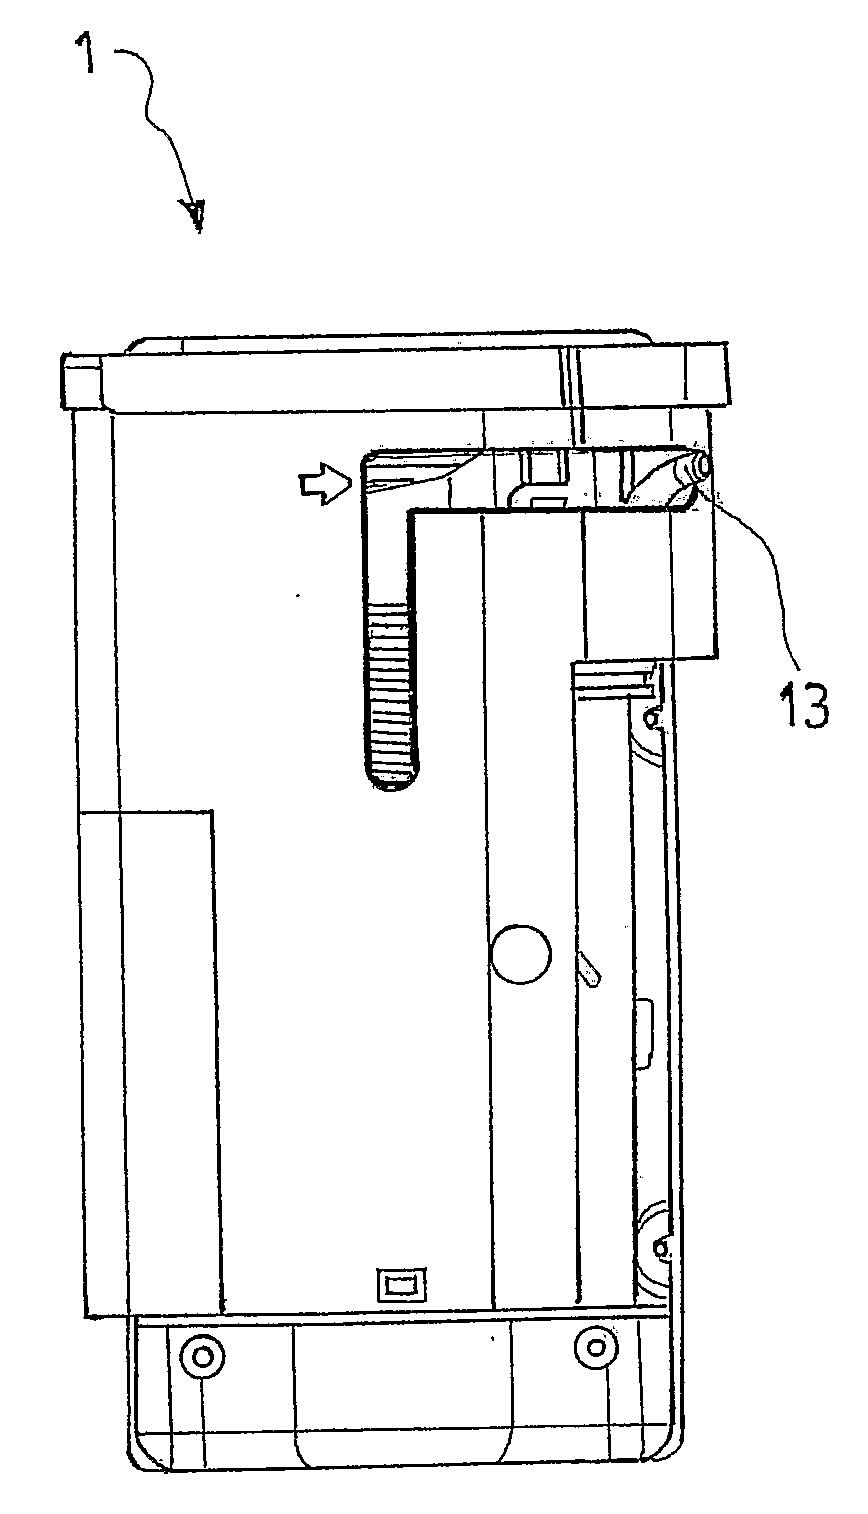 Process and Apparatus for Controlling the Preparation of Beverages